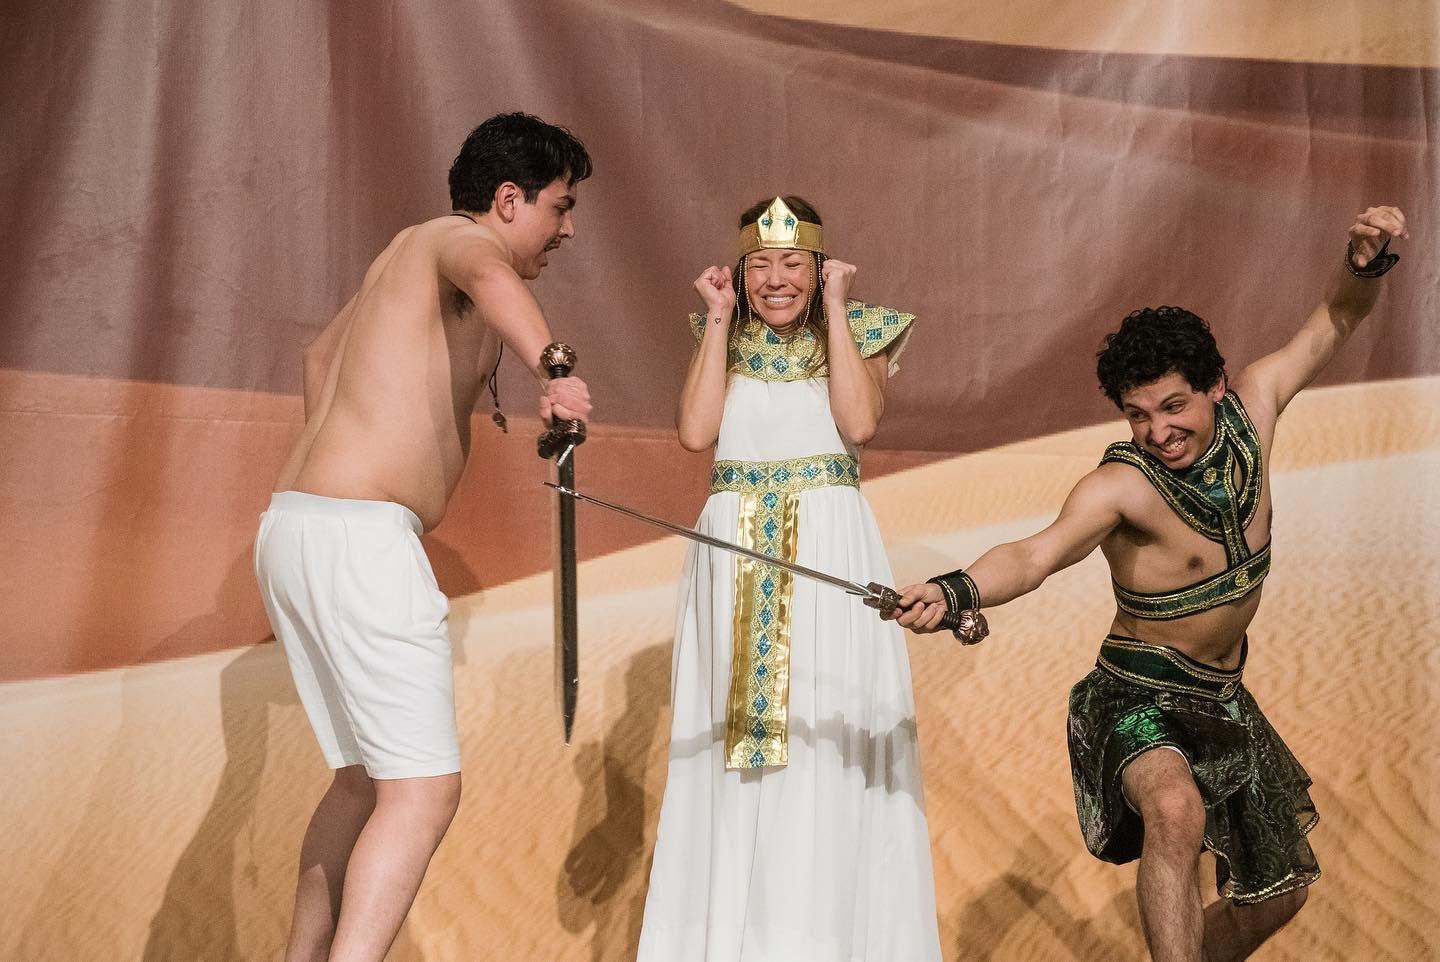 An egyptian monarch is showing frustration as a person (presumably a slave) is lashing out at another man in front. These are all actors.